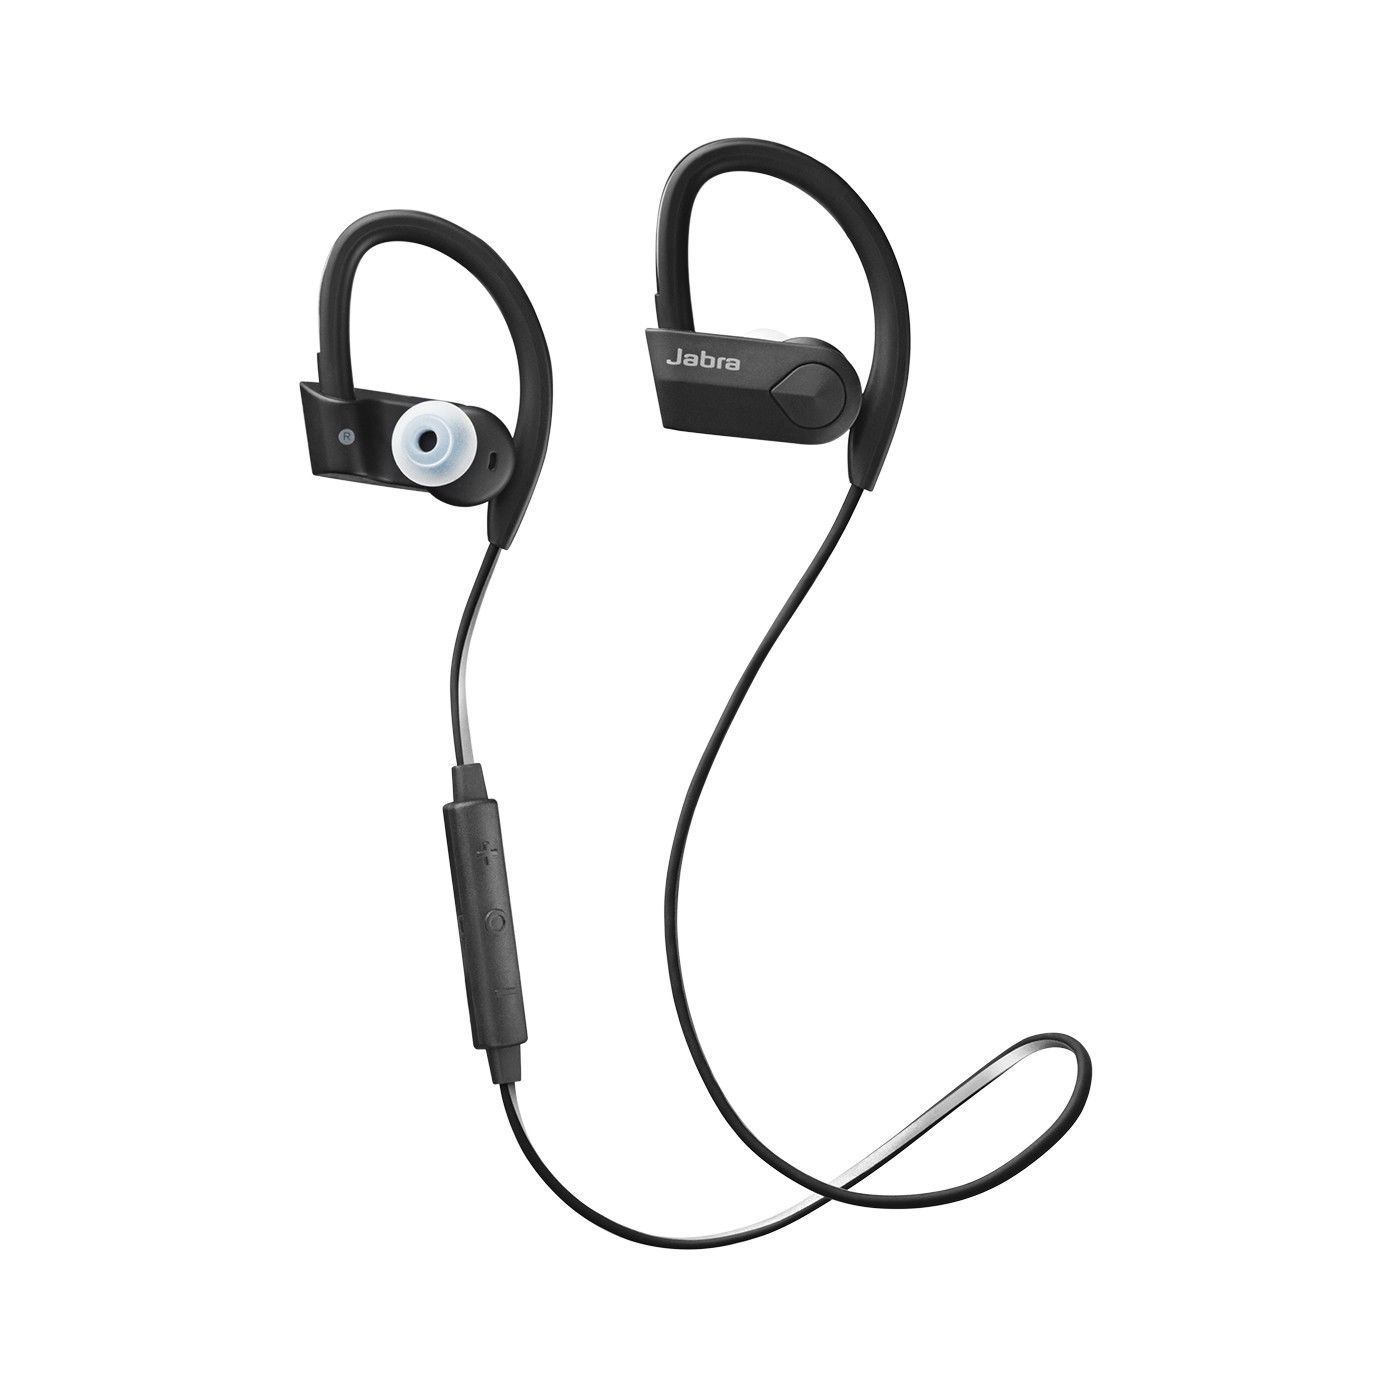 Refurbished Jabra Sport Pace wireless headphones for $13, free shipping